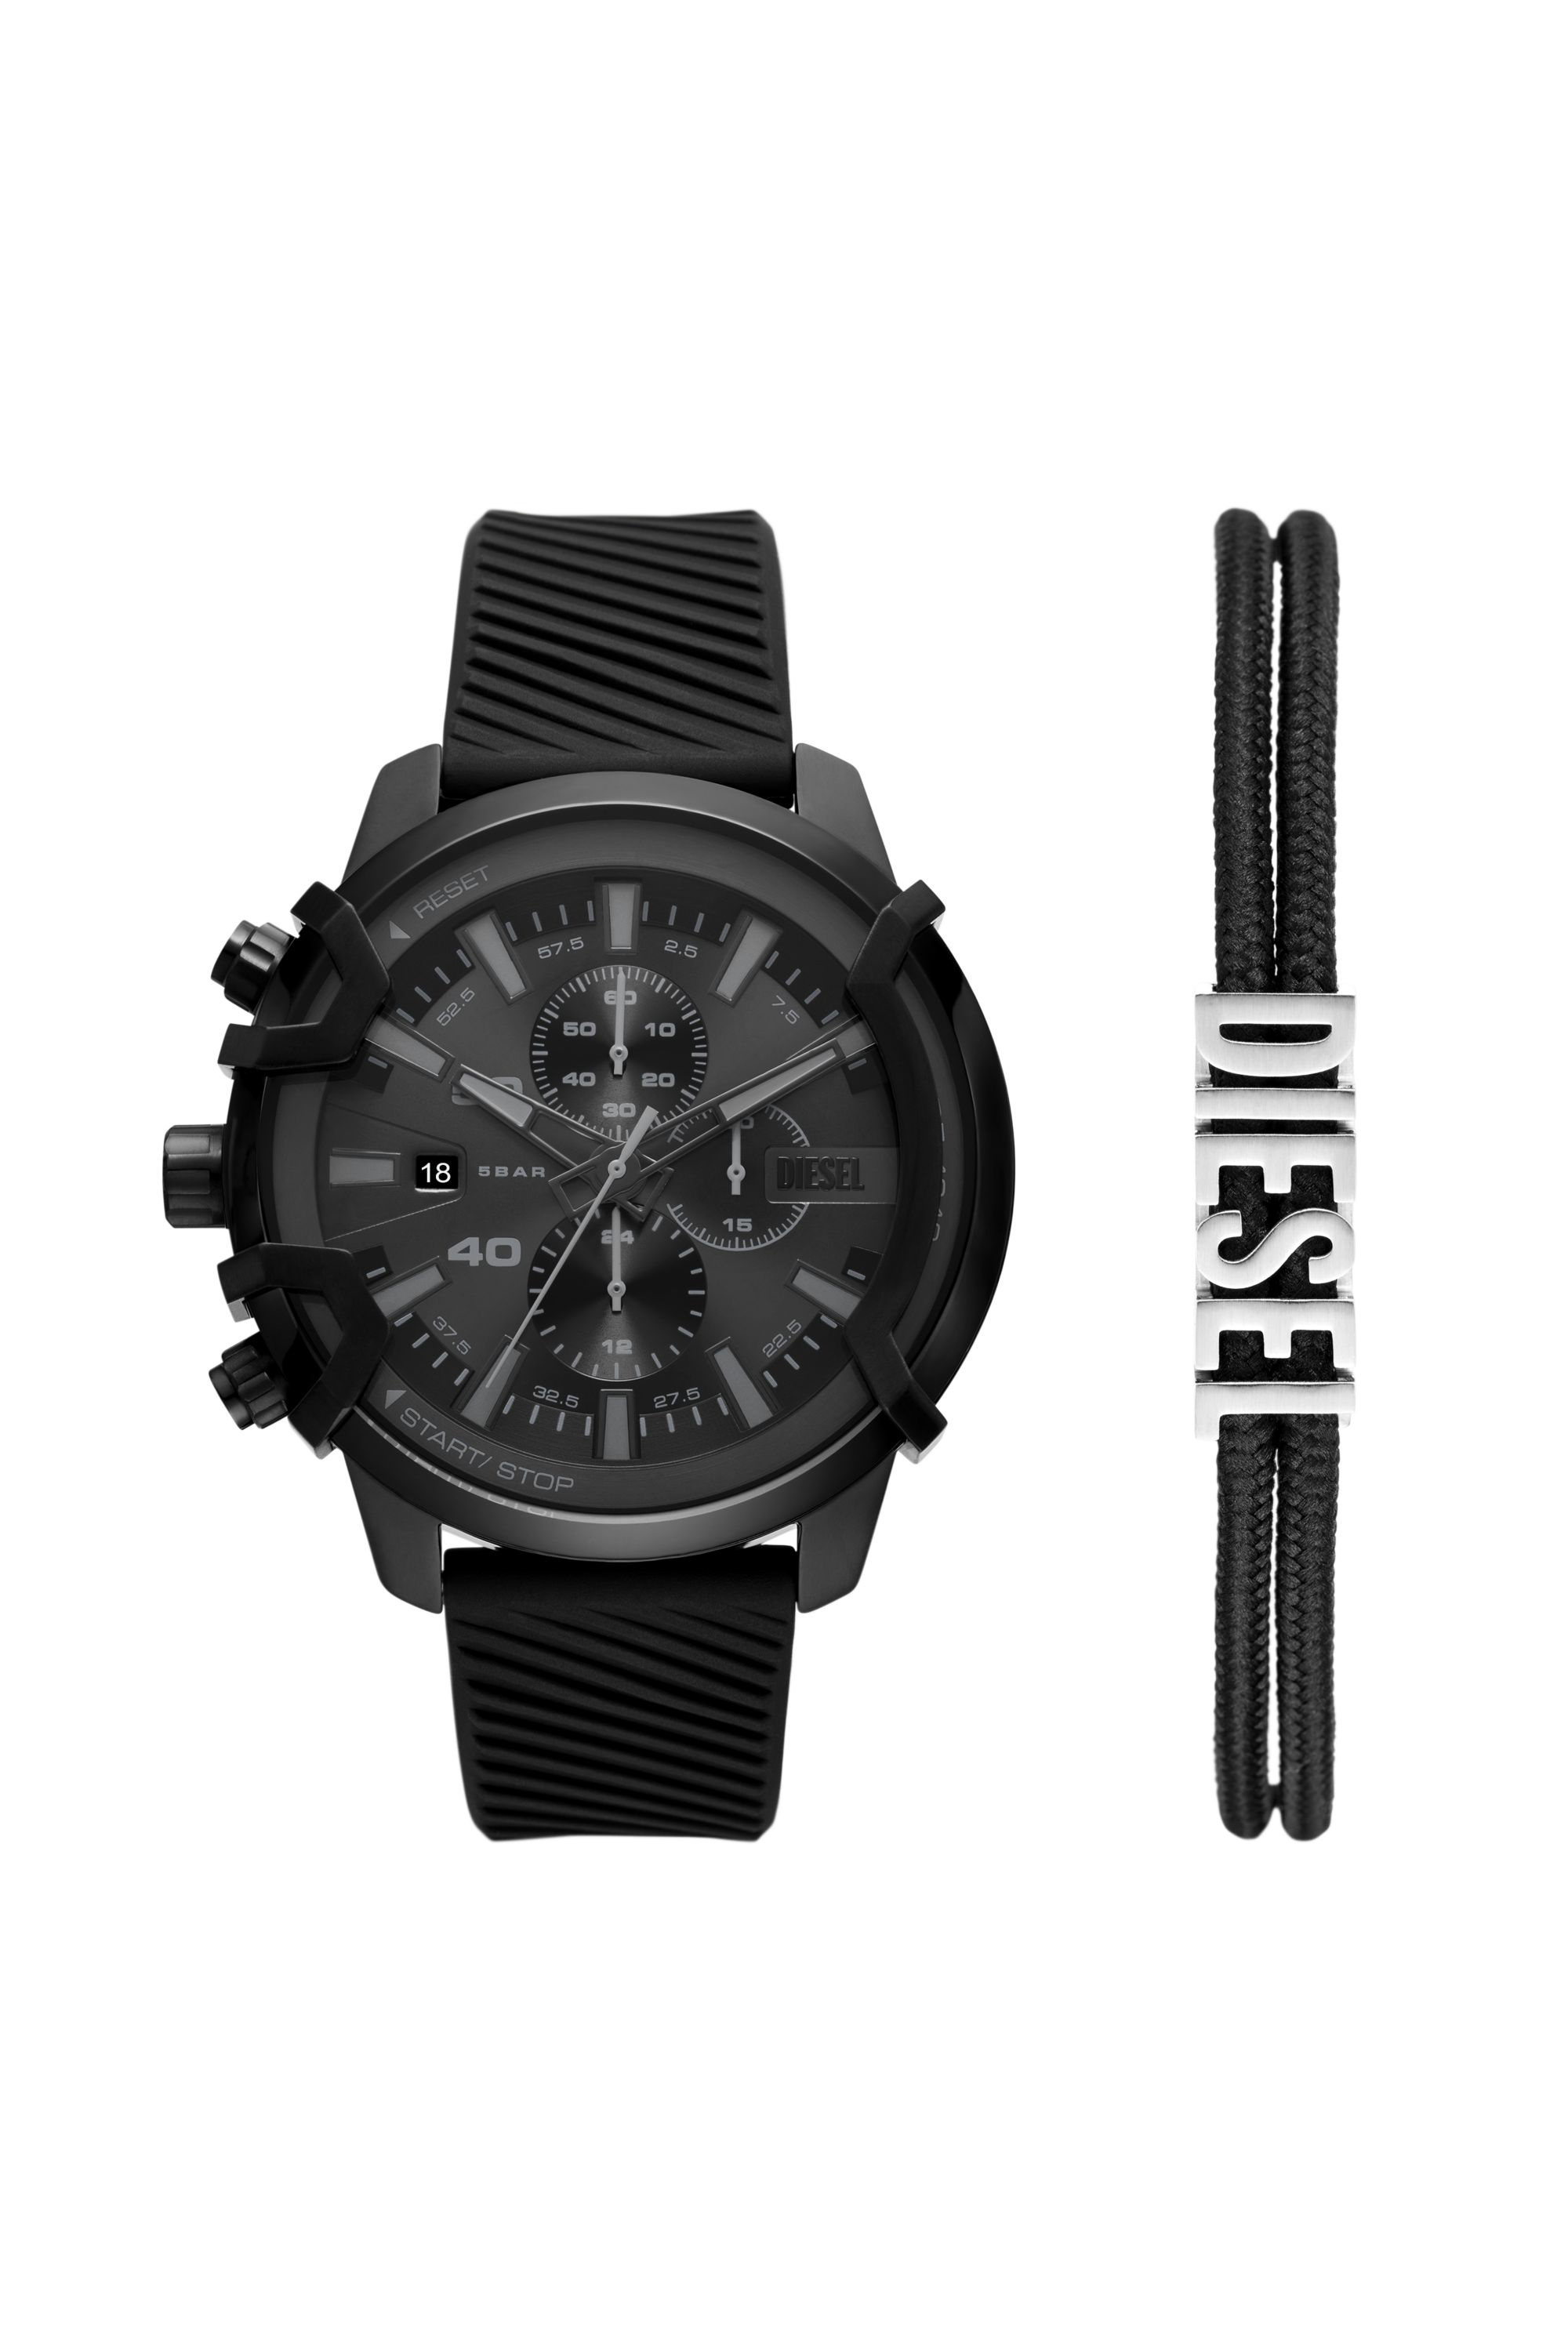 Diesel Men's Griffed Chronograph Black Silicone Watch 48mm Gift Set